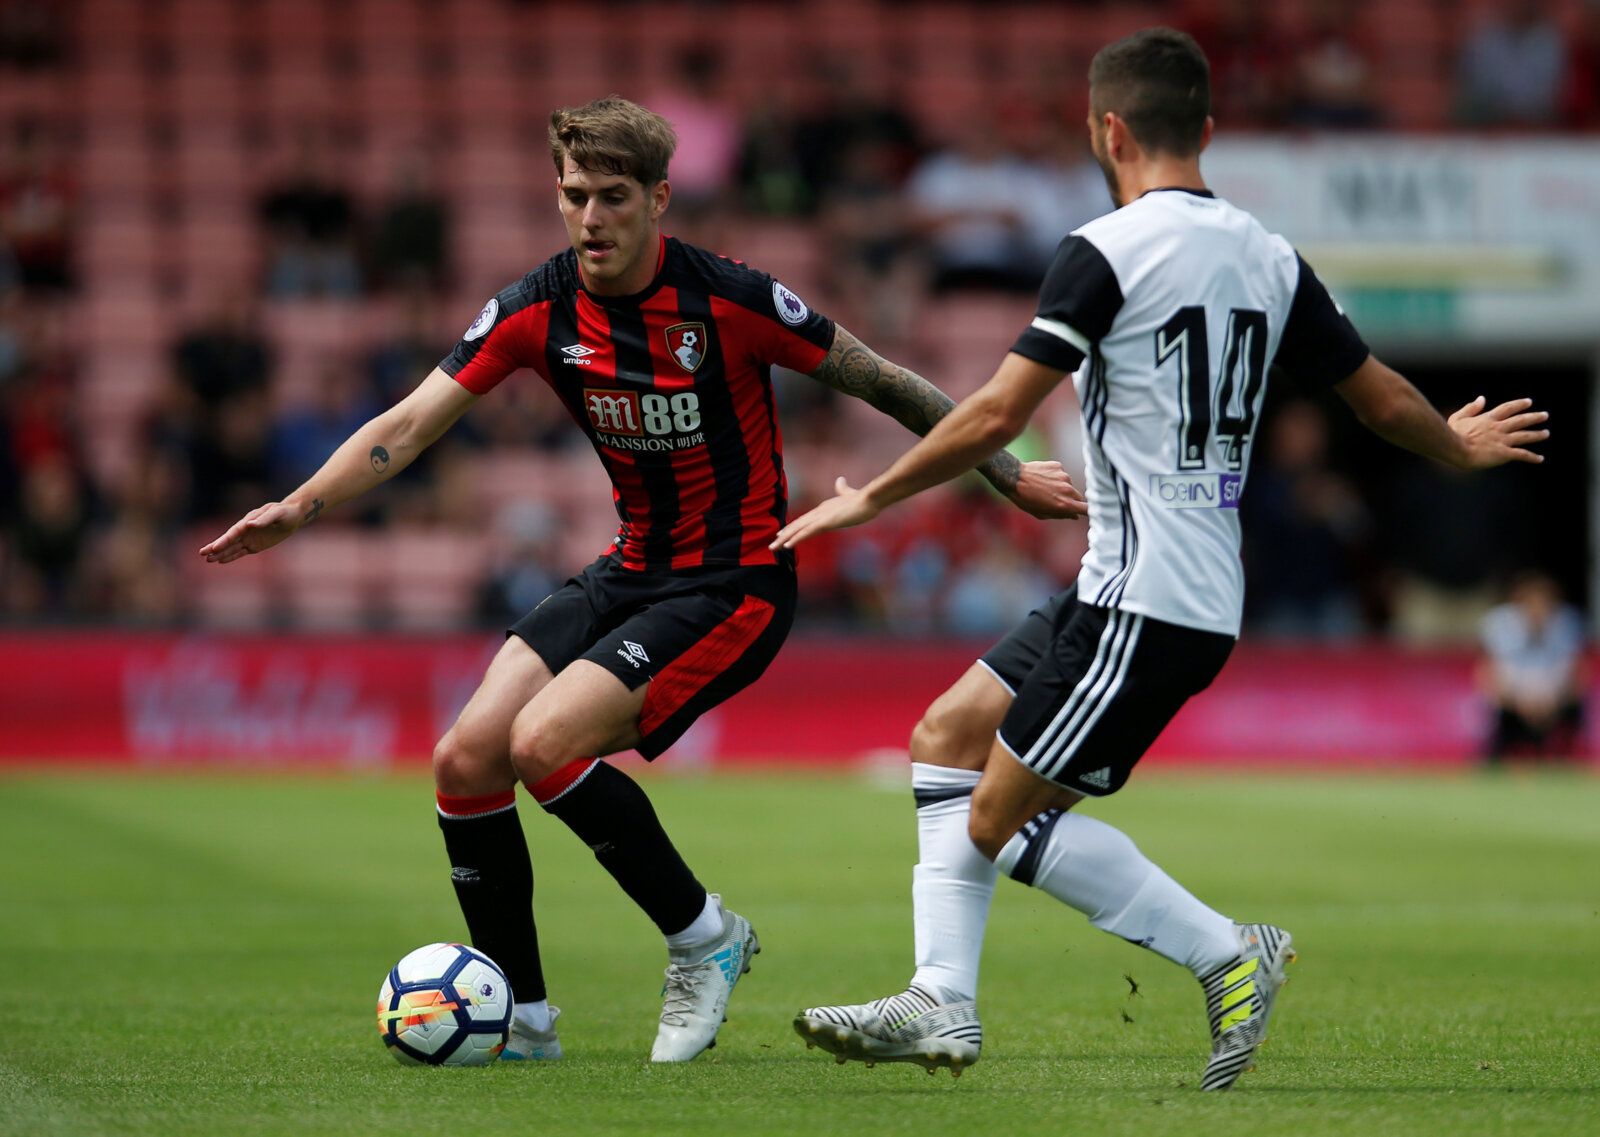 Soccer Football - AFC Bournemouth vs Valencia - Pre Season Friendly - Bournemouth, Britain - July 30, 2017   Bournemouth's Connor Mahoney in action   Action Images via Reuters/Paul Childs